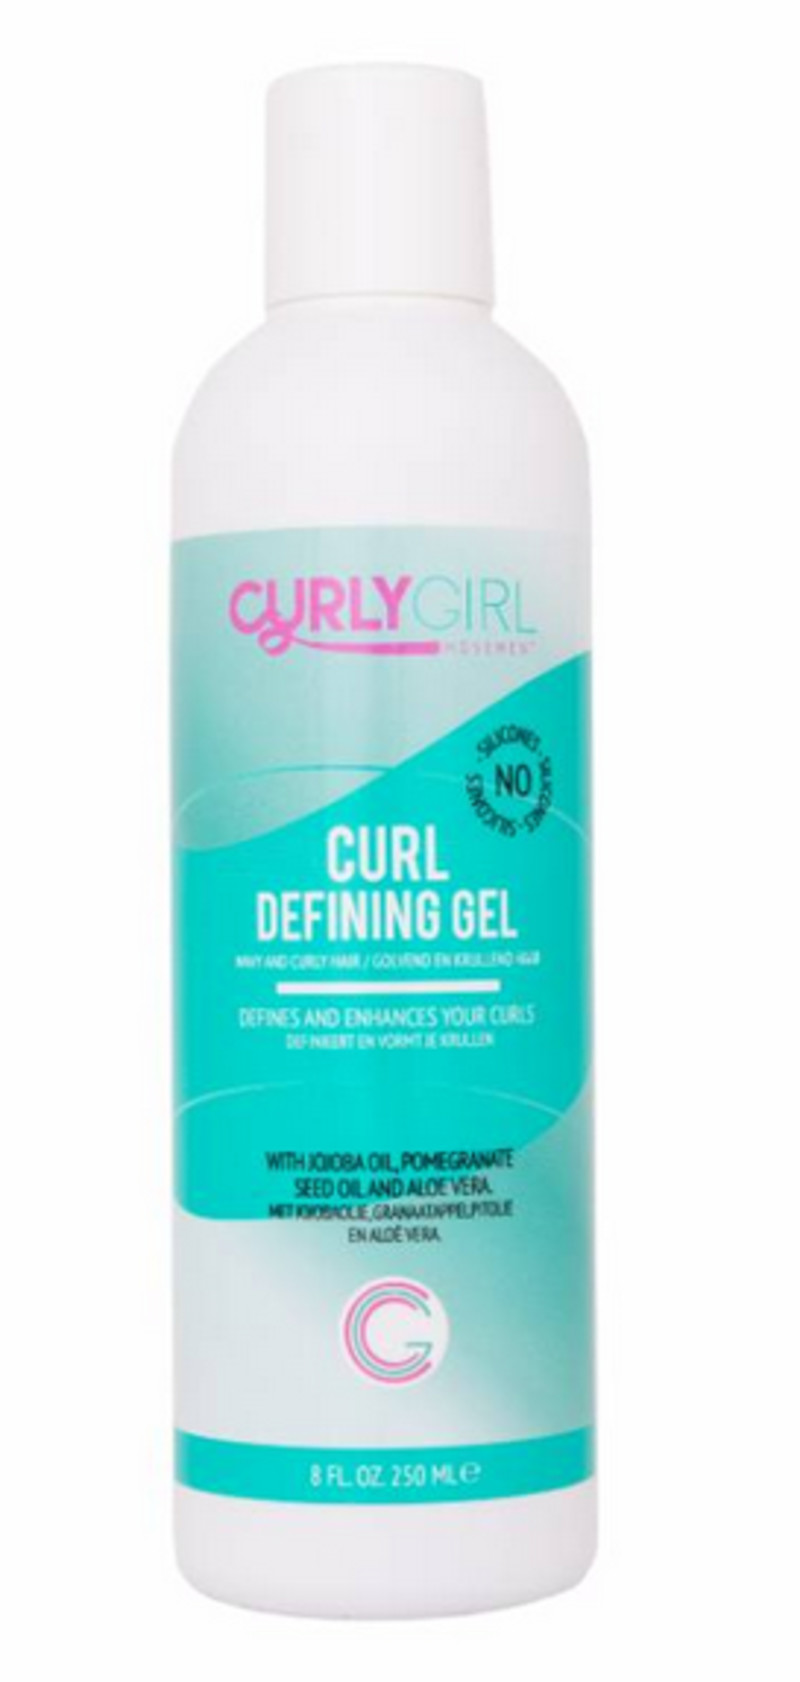 Curl Defining Gel | Curly Girl Movement Krul producten - We Are Eves:  honest cosmetic reviews.